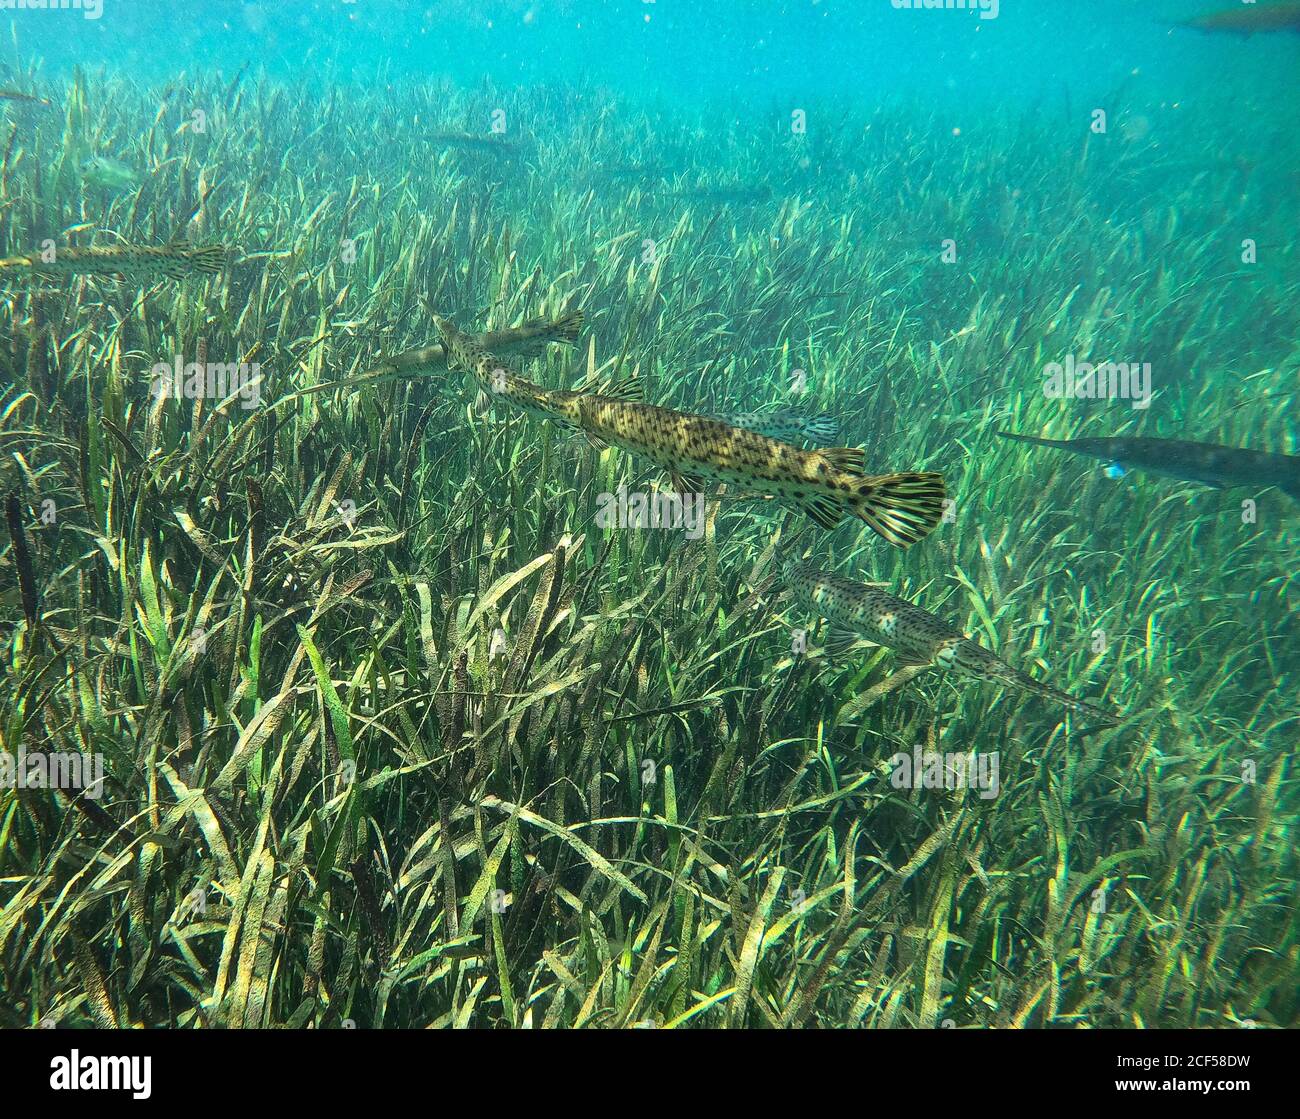 A school of Gar Fish in Rainbow River located in Dunnellon, Florida. Stock Photo